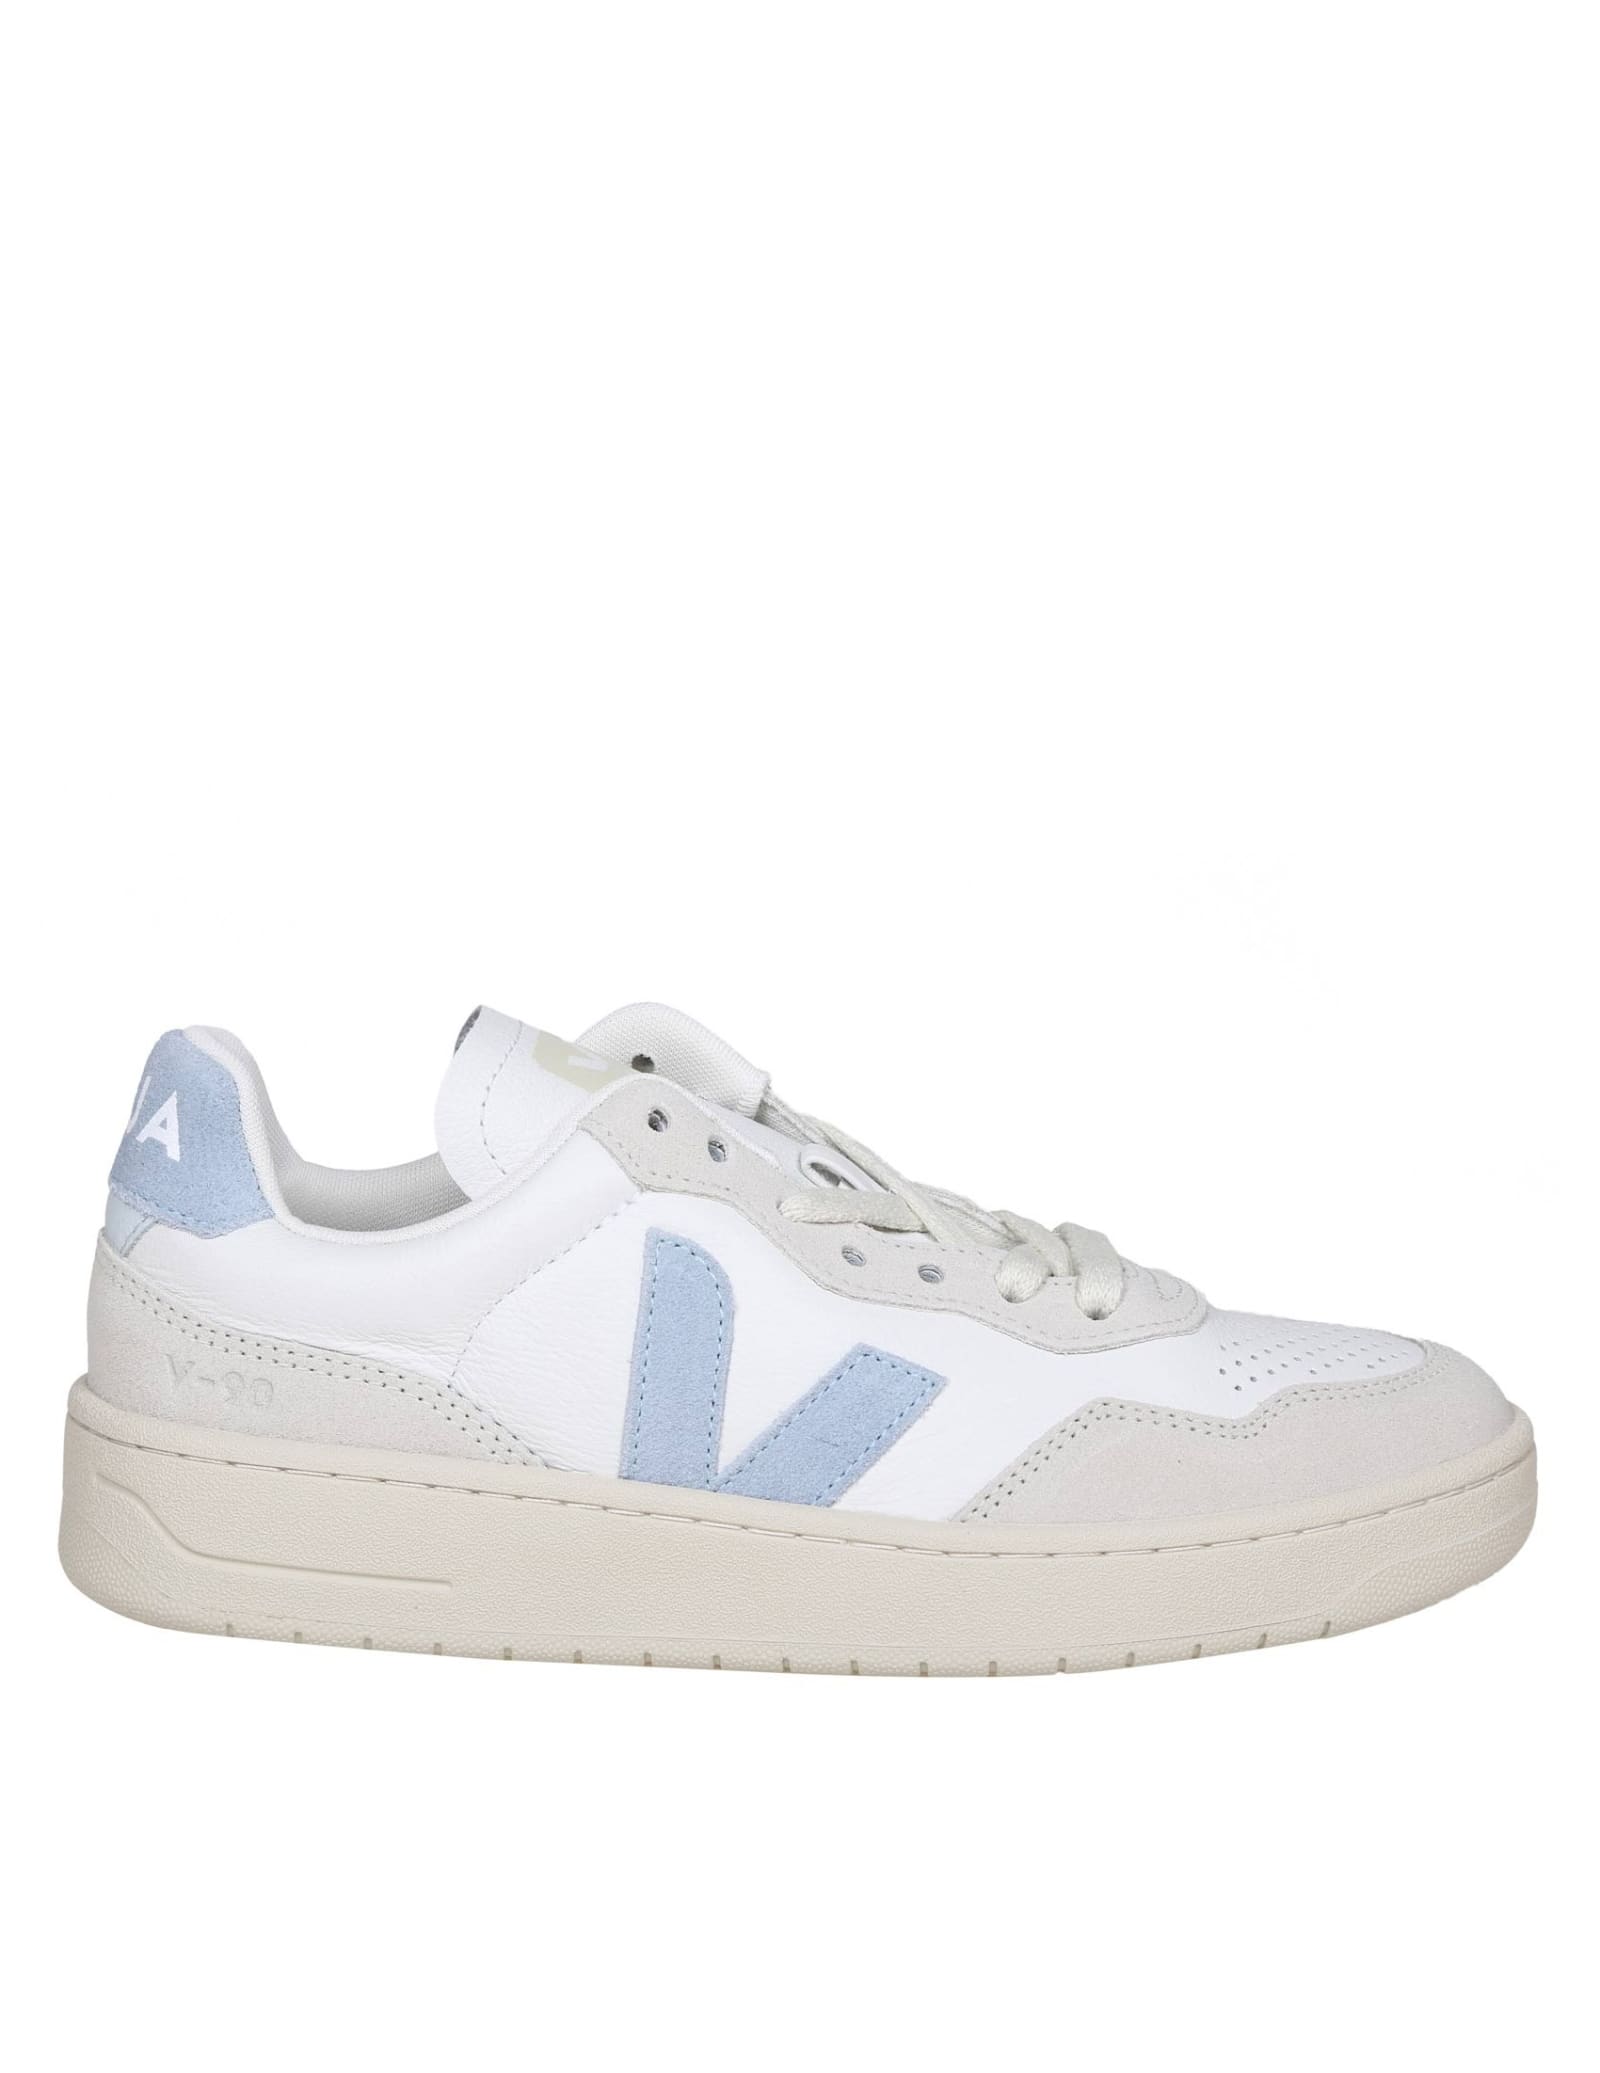 V 90 Sneakers In White And Light Blue Leather And Suede